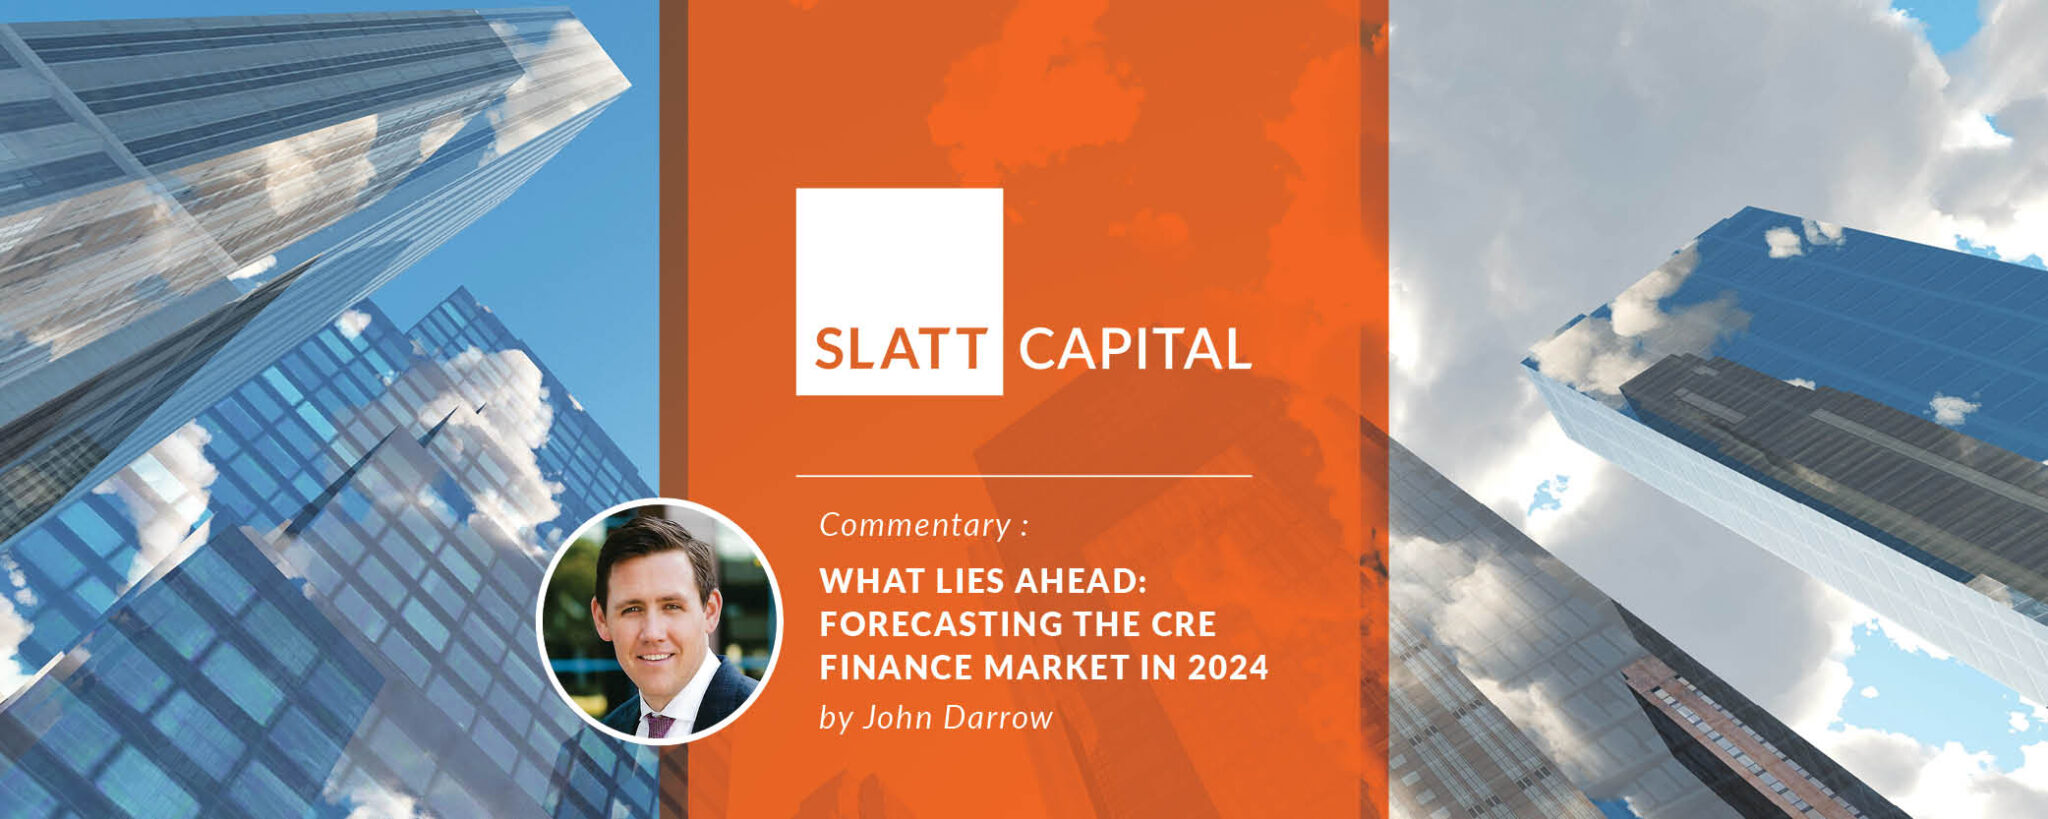 What Lies Ahead Forecasting the CRE Finance Market in 2024 By John